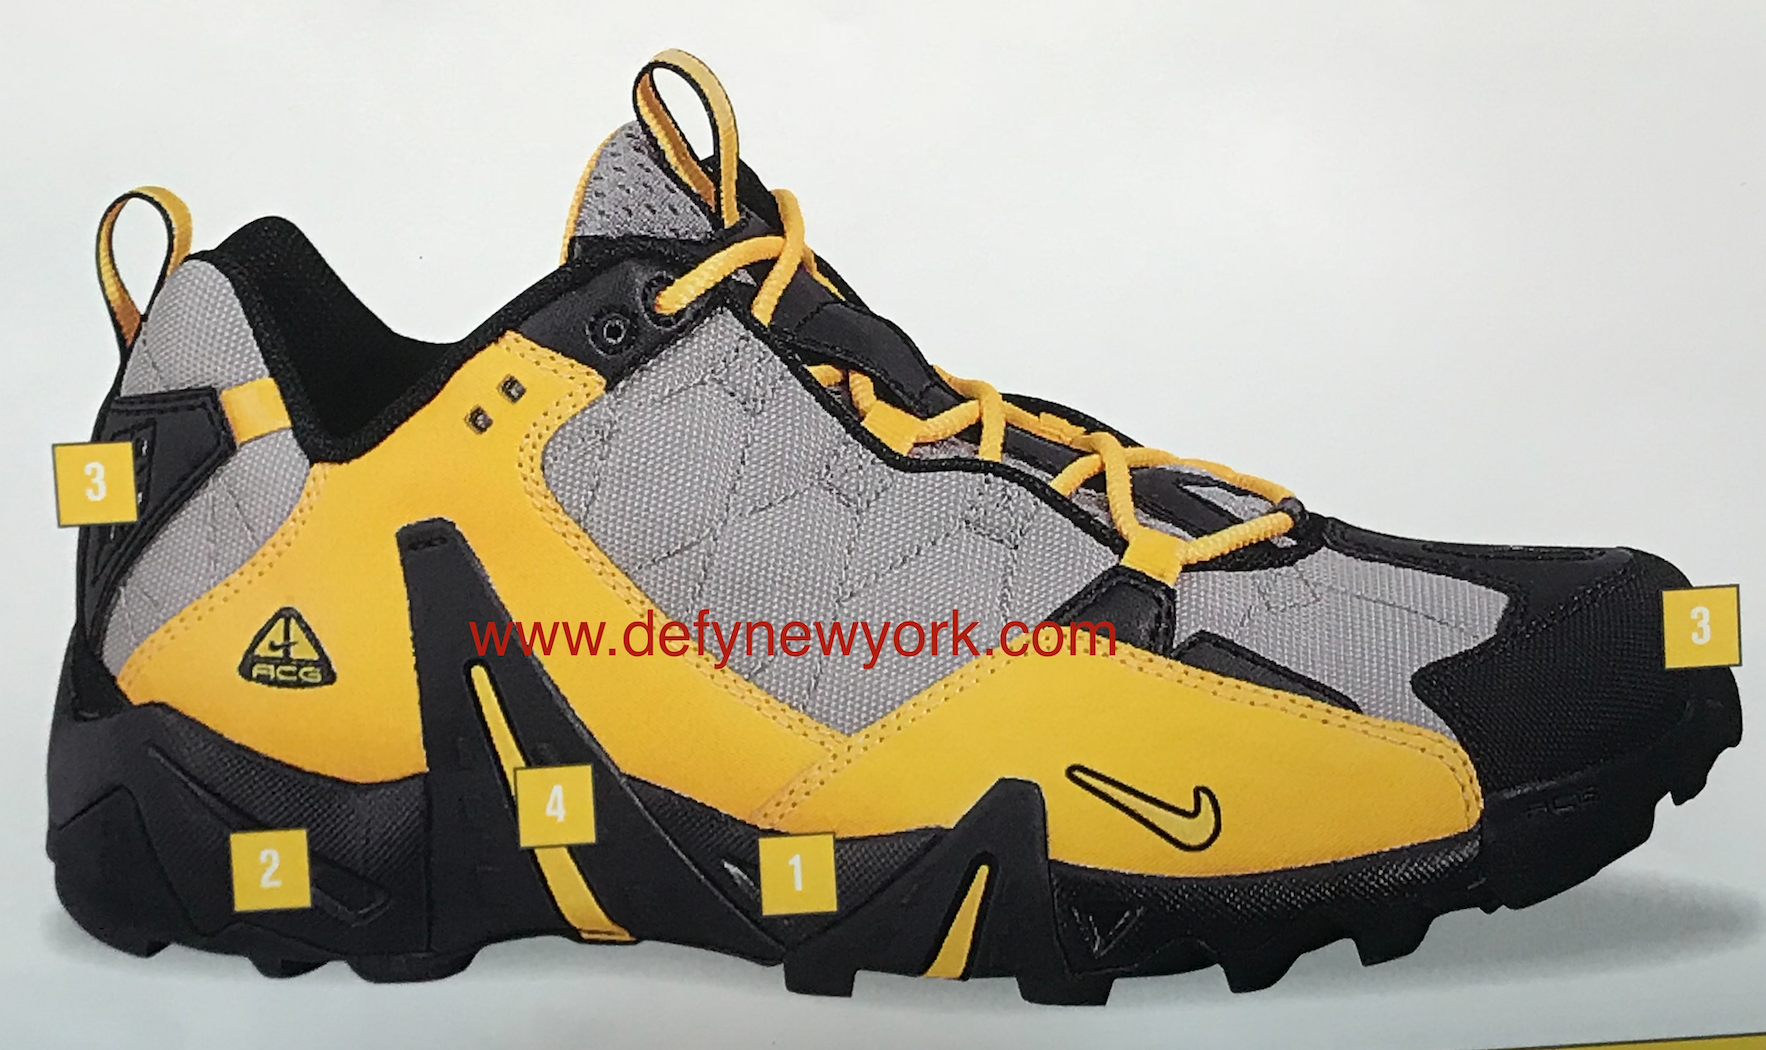 new nike acg boots 2019